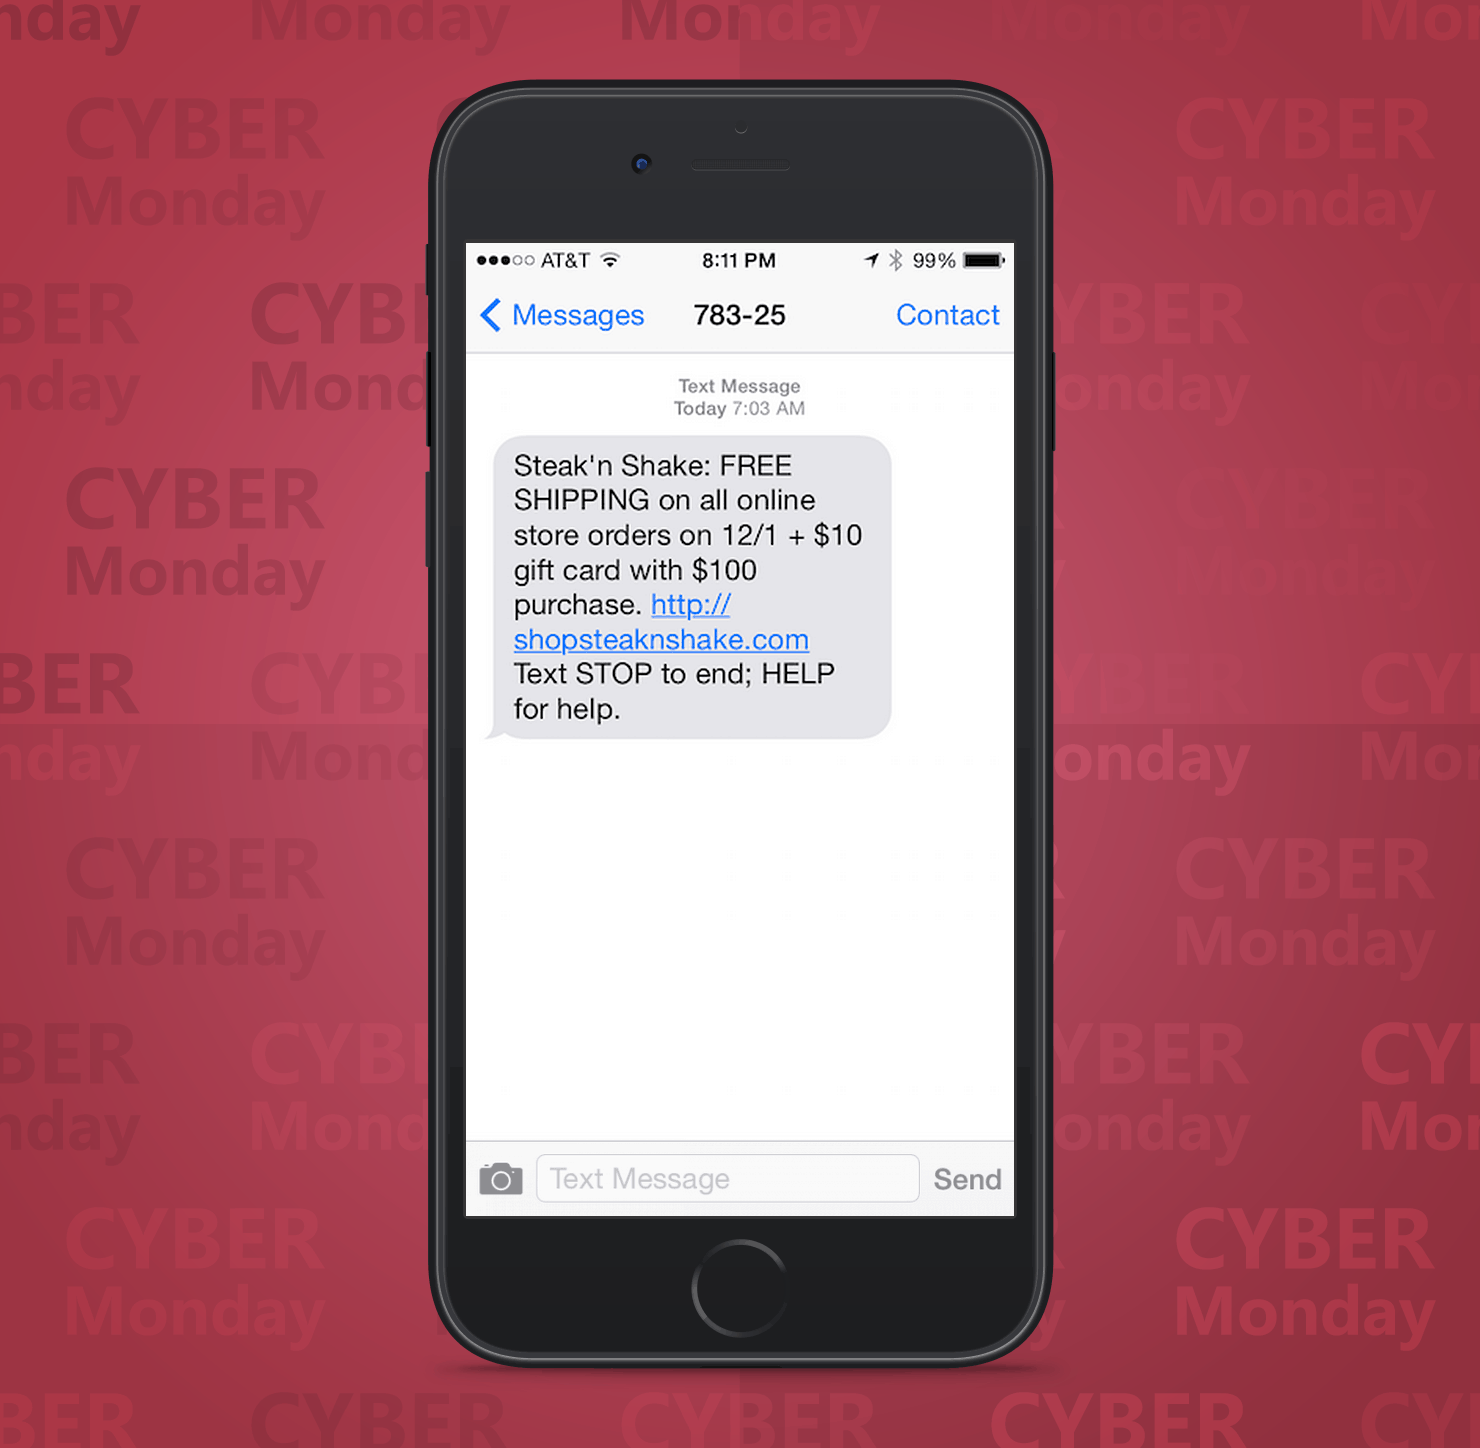 SMS Coupon Example Sent on Cyber Monday From Steakn-Shake Restaurants to Customers